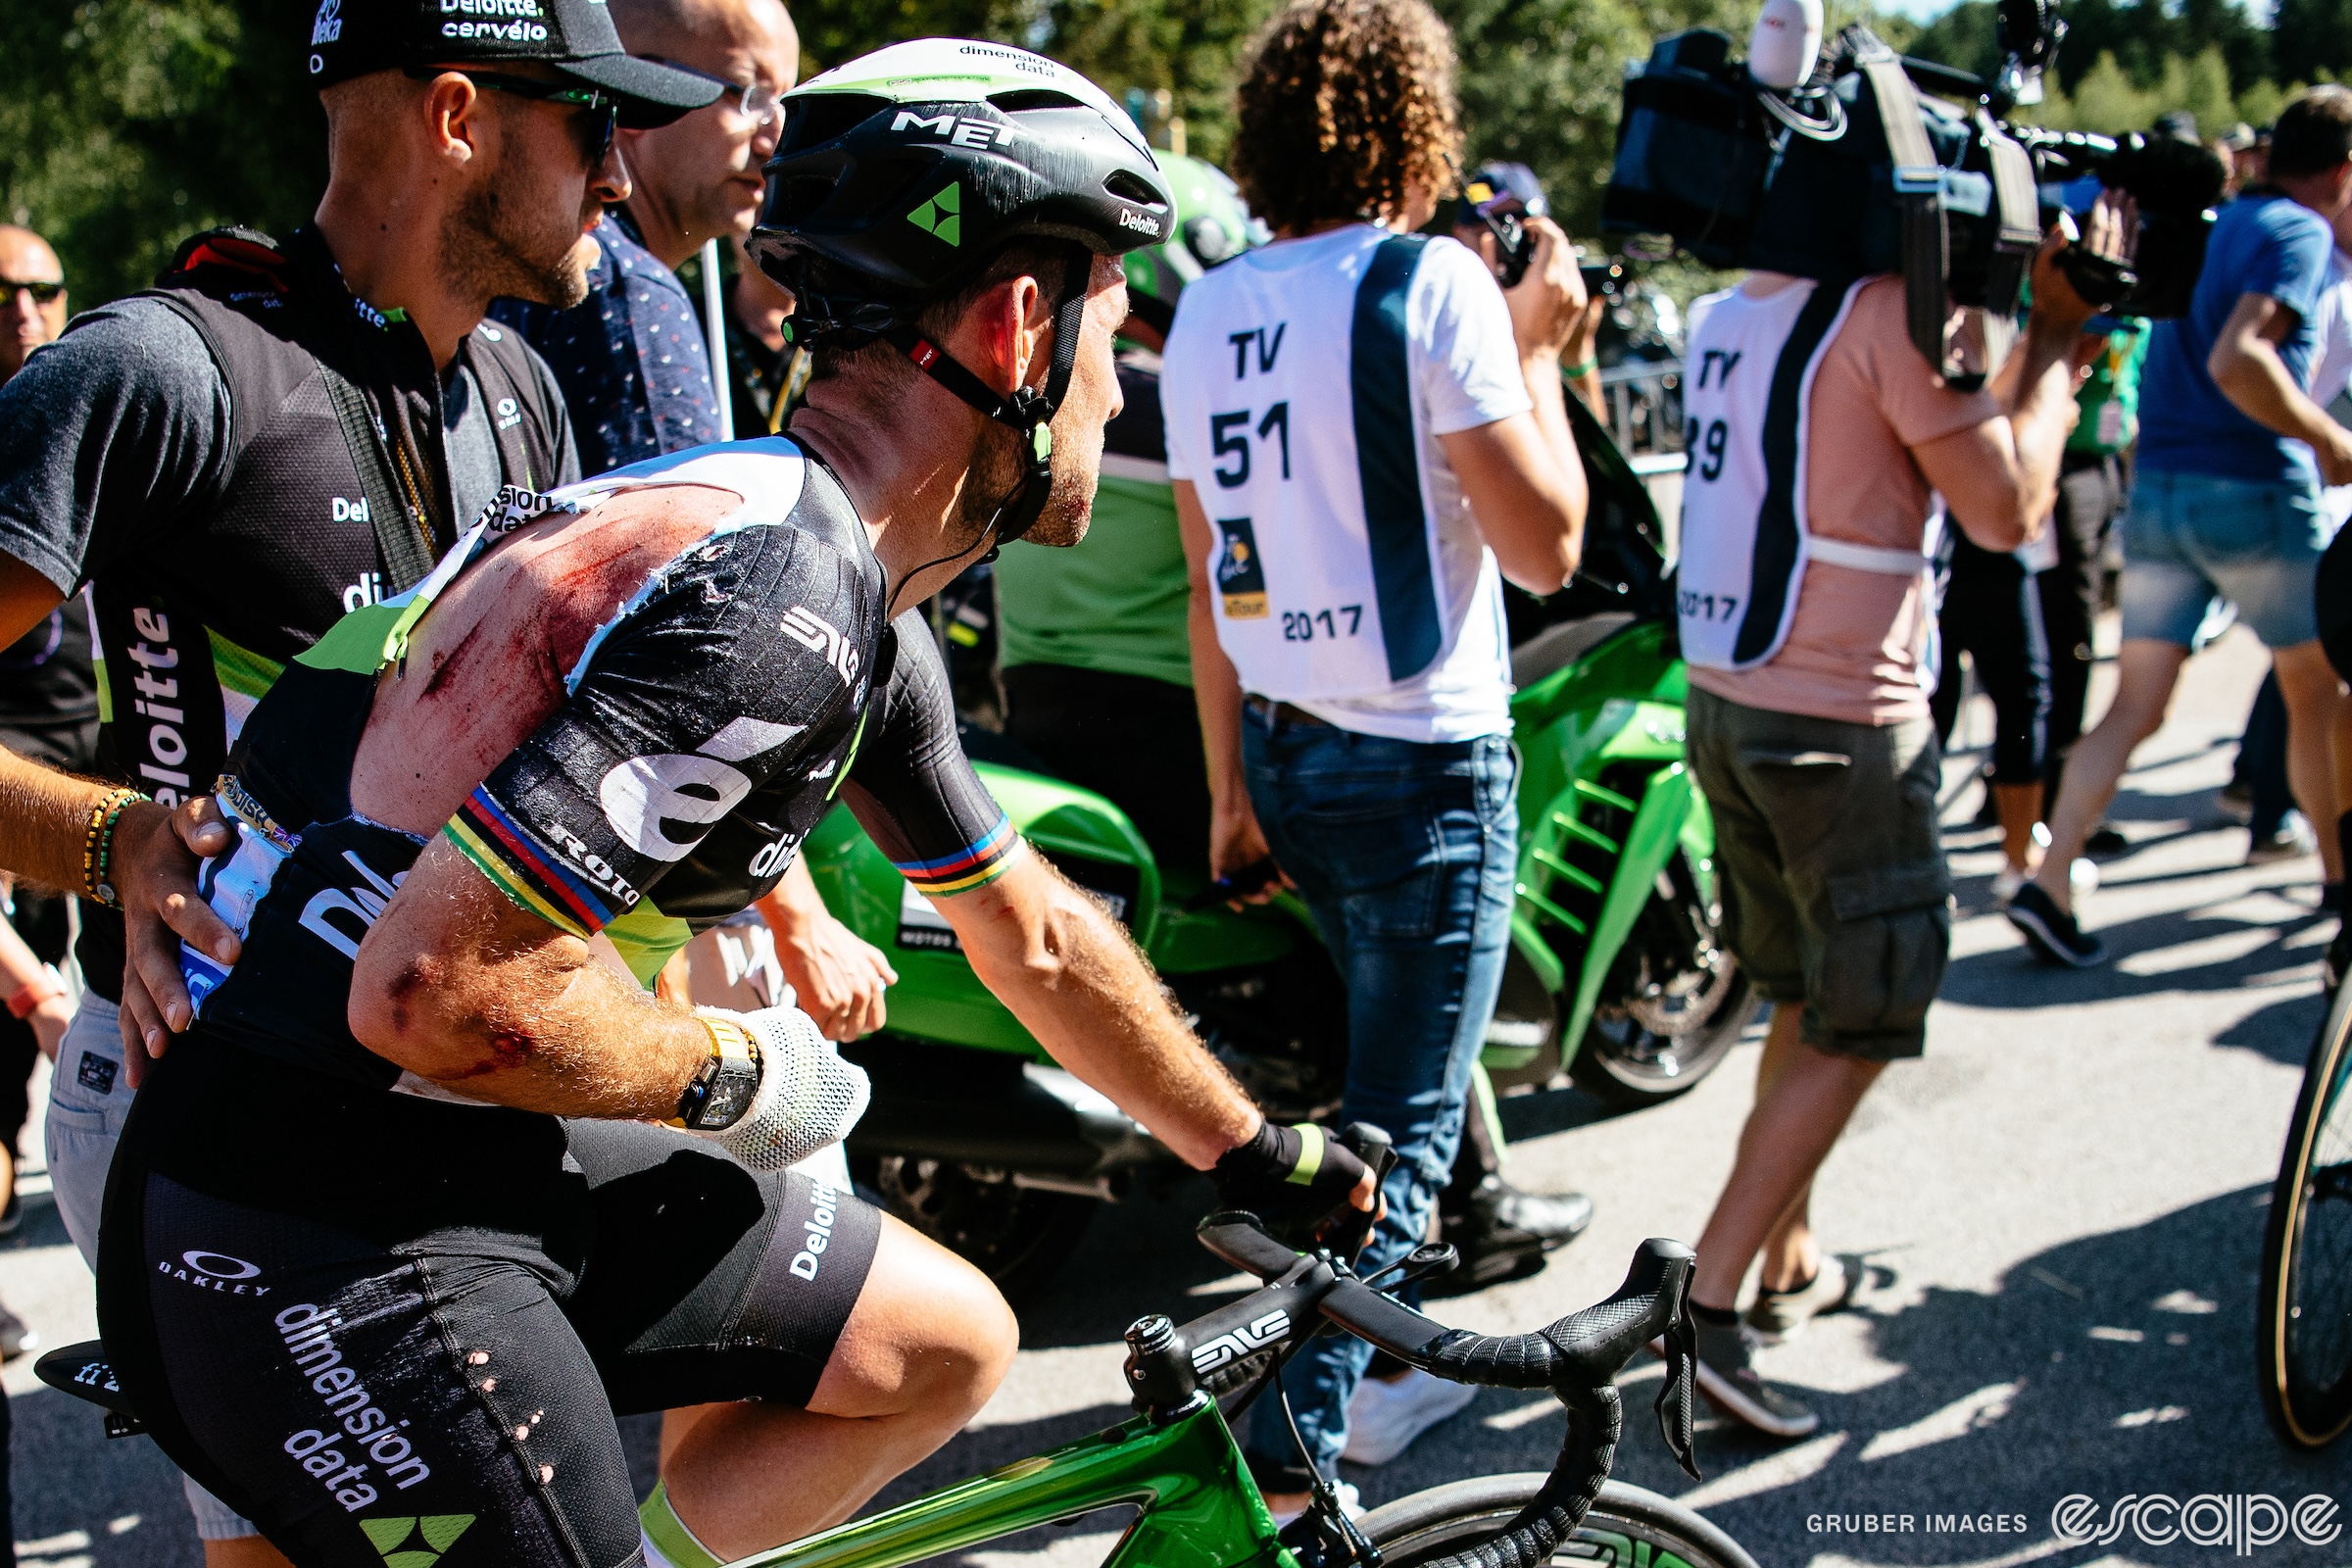 Mark Cavendish rides slowly after the finish of stage 4 of the 2017 Tour de France. He's assisted by a Dimension Data soigneur, and cradles his right arm close to his chest. His jersey is badly torn and his right arm and shoulder are scraped and bloody.